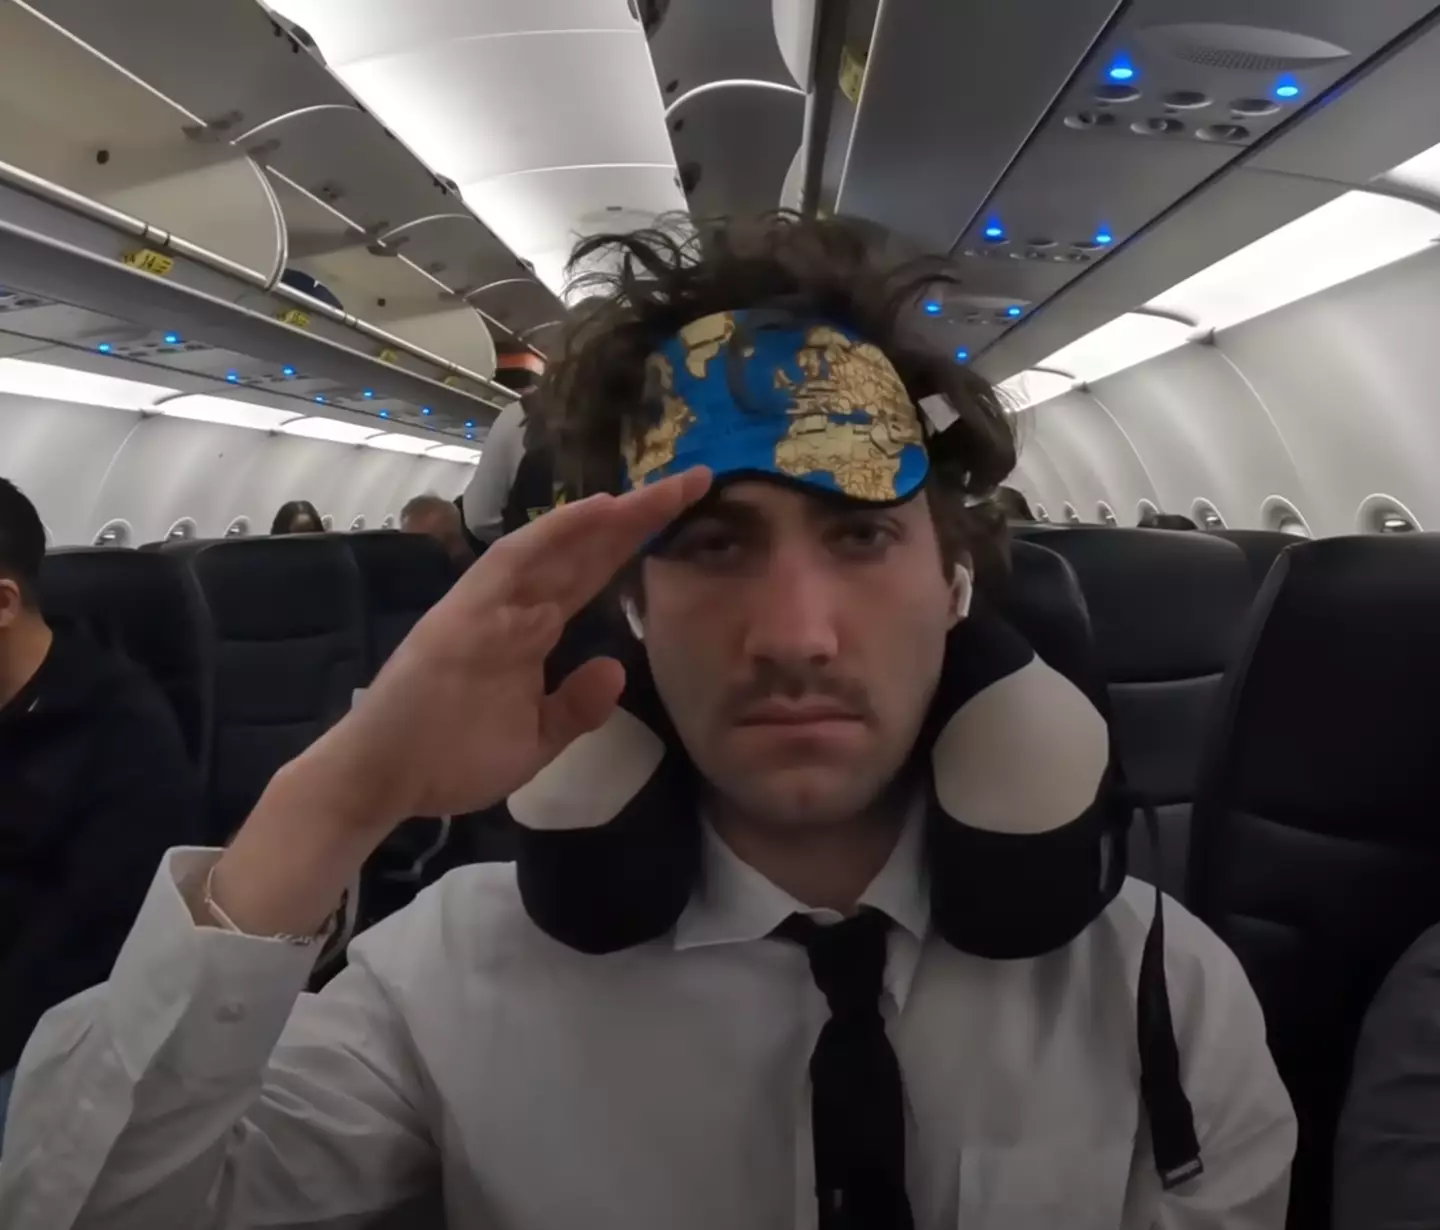 The YouTuber ended up flying with 28 airlines. (YouTube/Airrack)